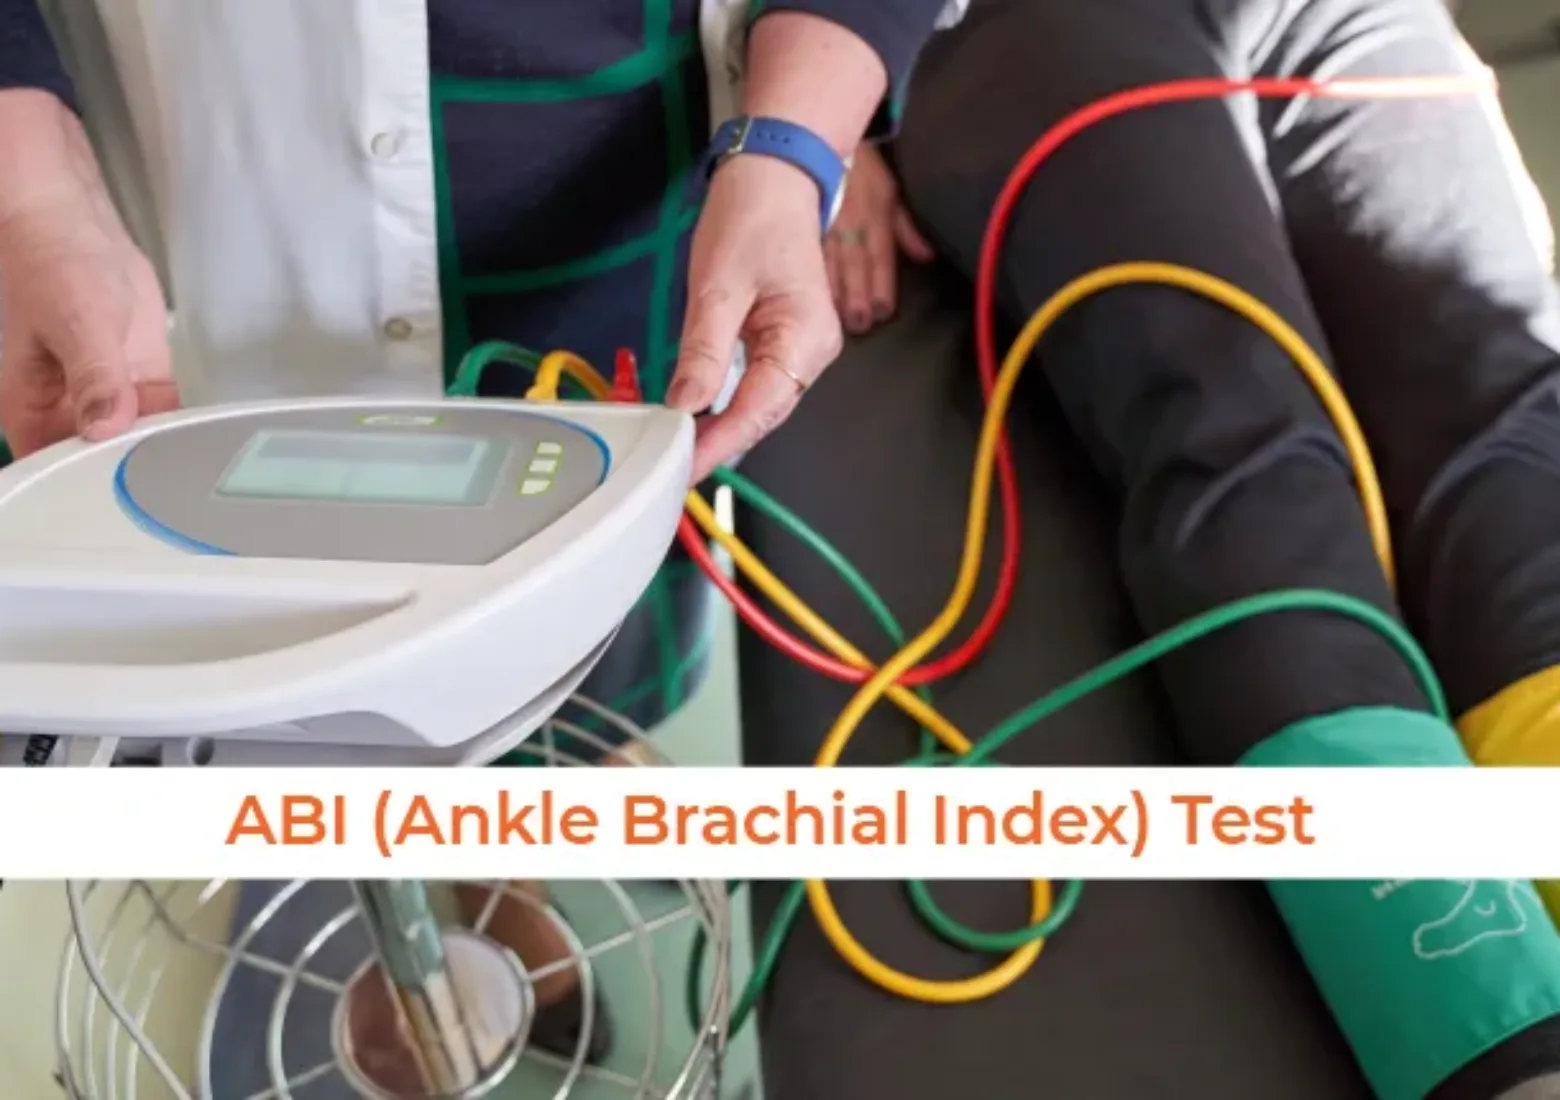 What is an ABI (Ankle Brachial Index) Test?